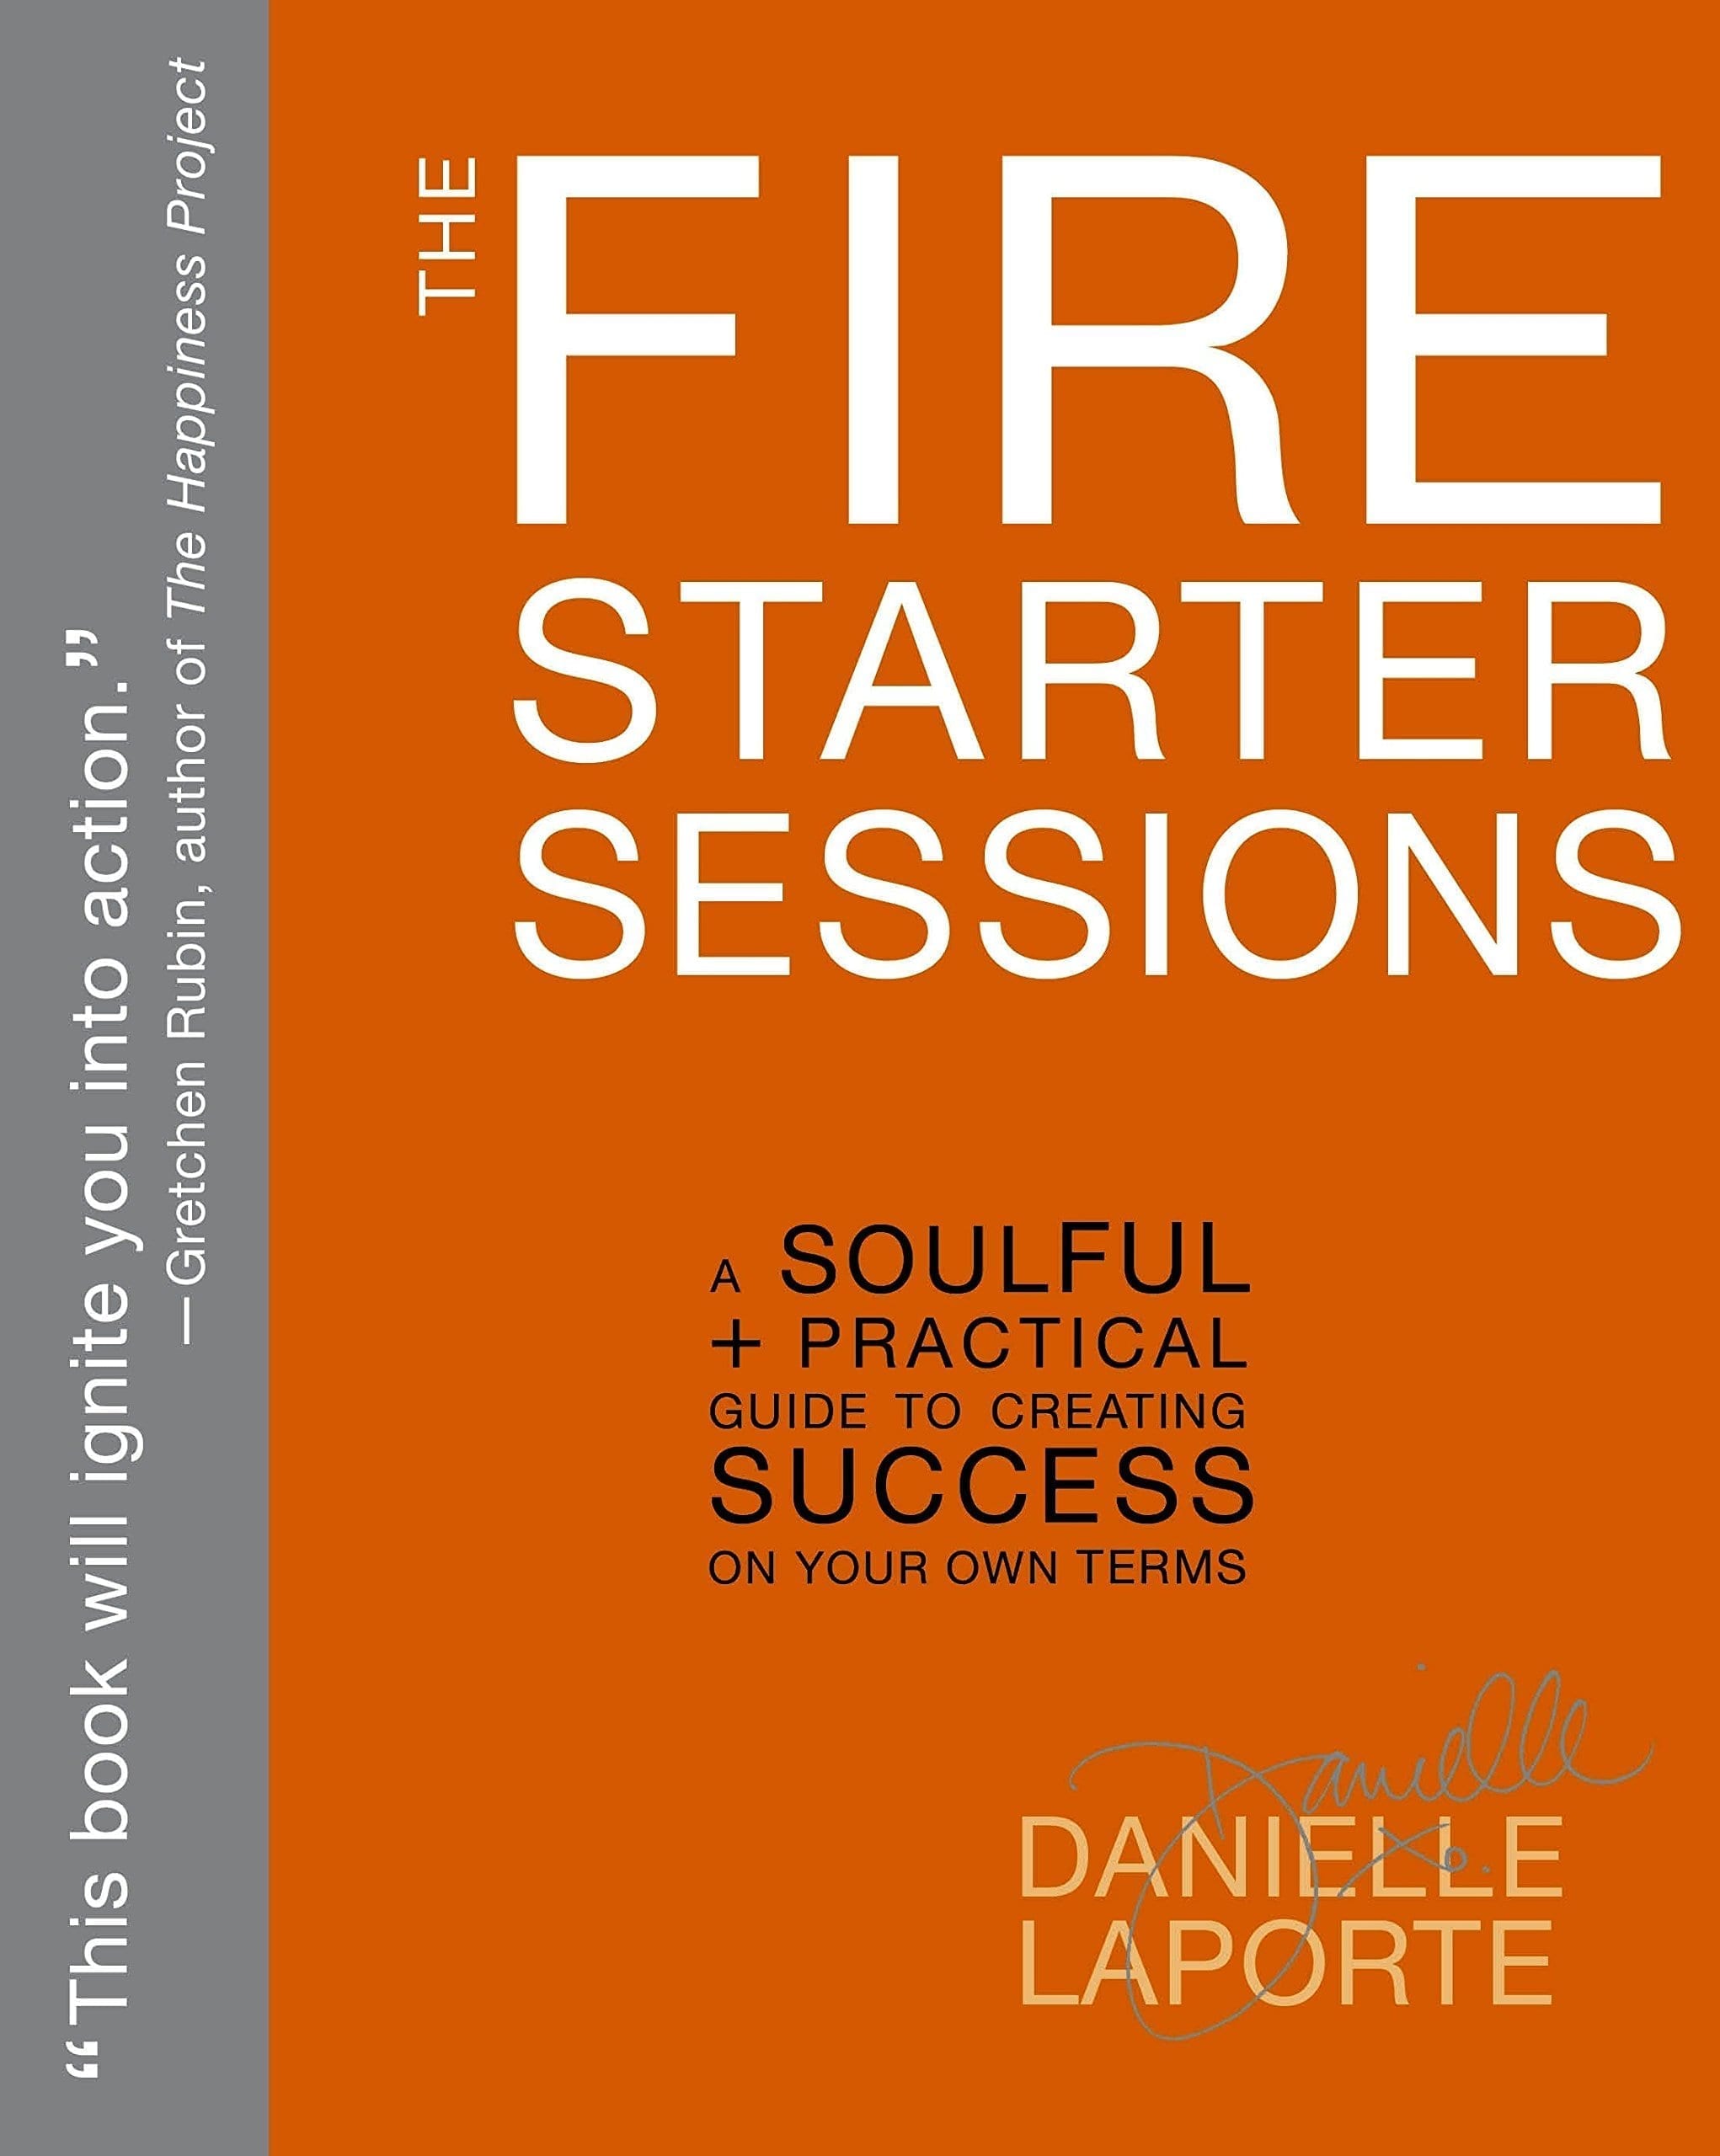 The Fire Starter Sessions by Danielle LaPorte